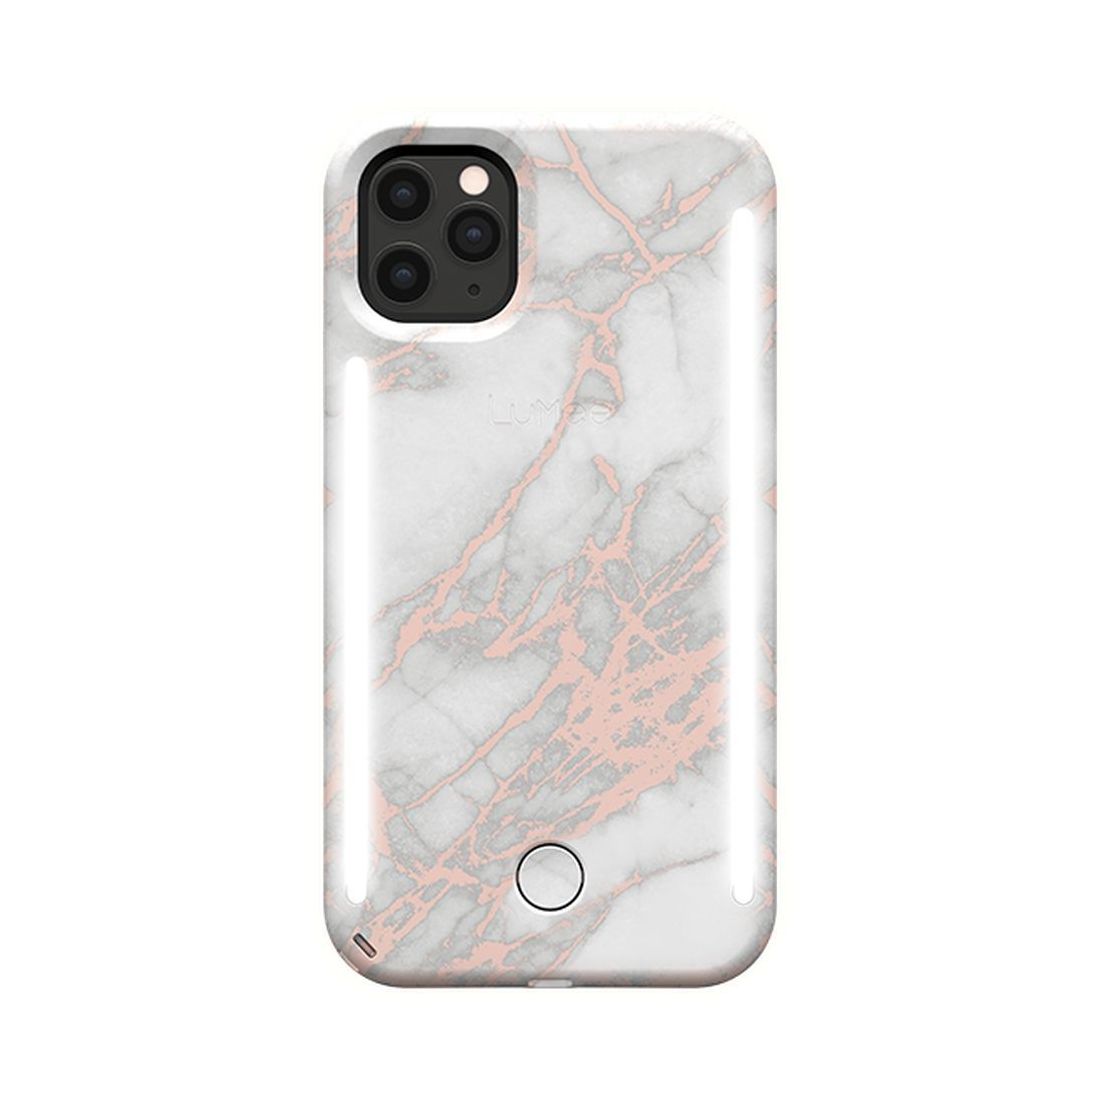 Lumee Duo Case Metallic Marble/White Rose Gold for iPhone 11 Pro